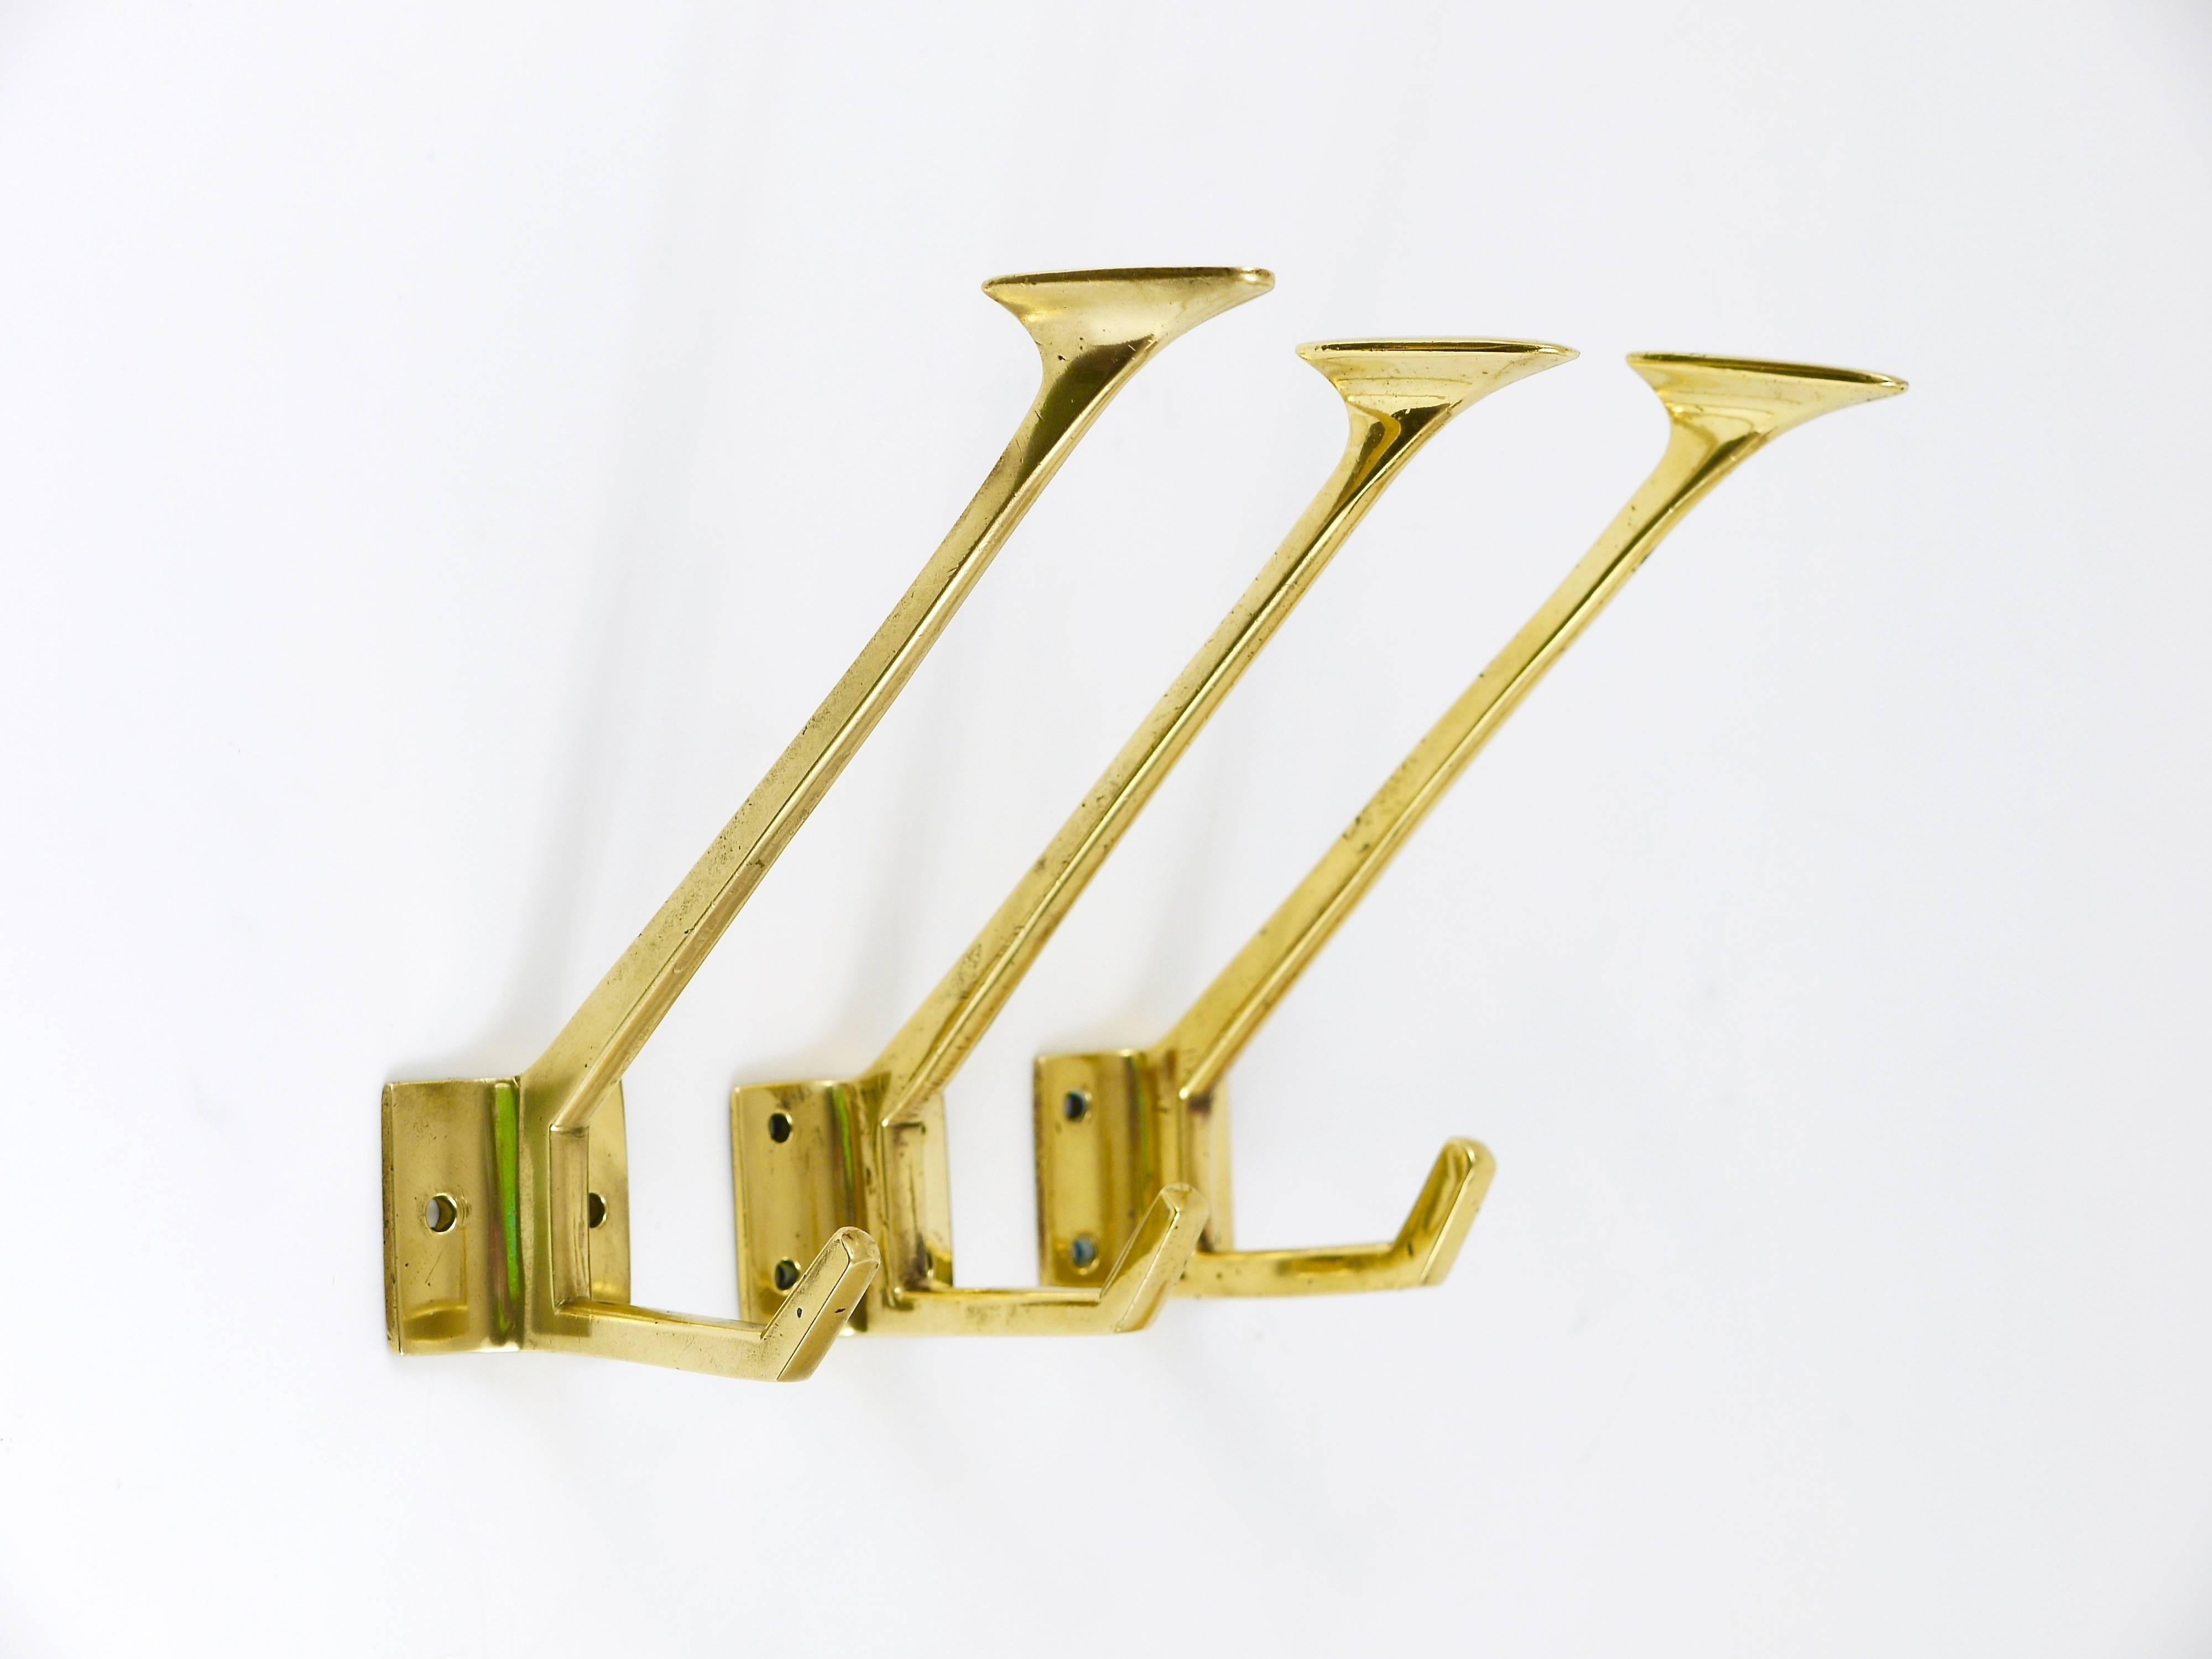 Three beautiful wall coat hooks, handmade of solid brass, dated circa 1910-1920 in Vienna, Austria. Gently polished by hand, in good condition with nice patina. Sold as a set of three.